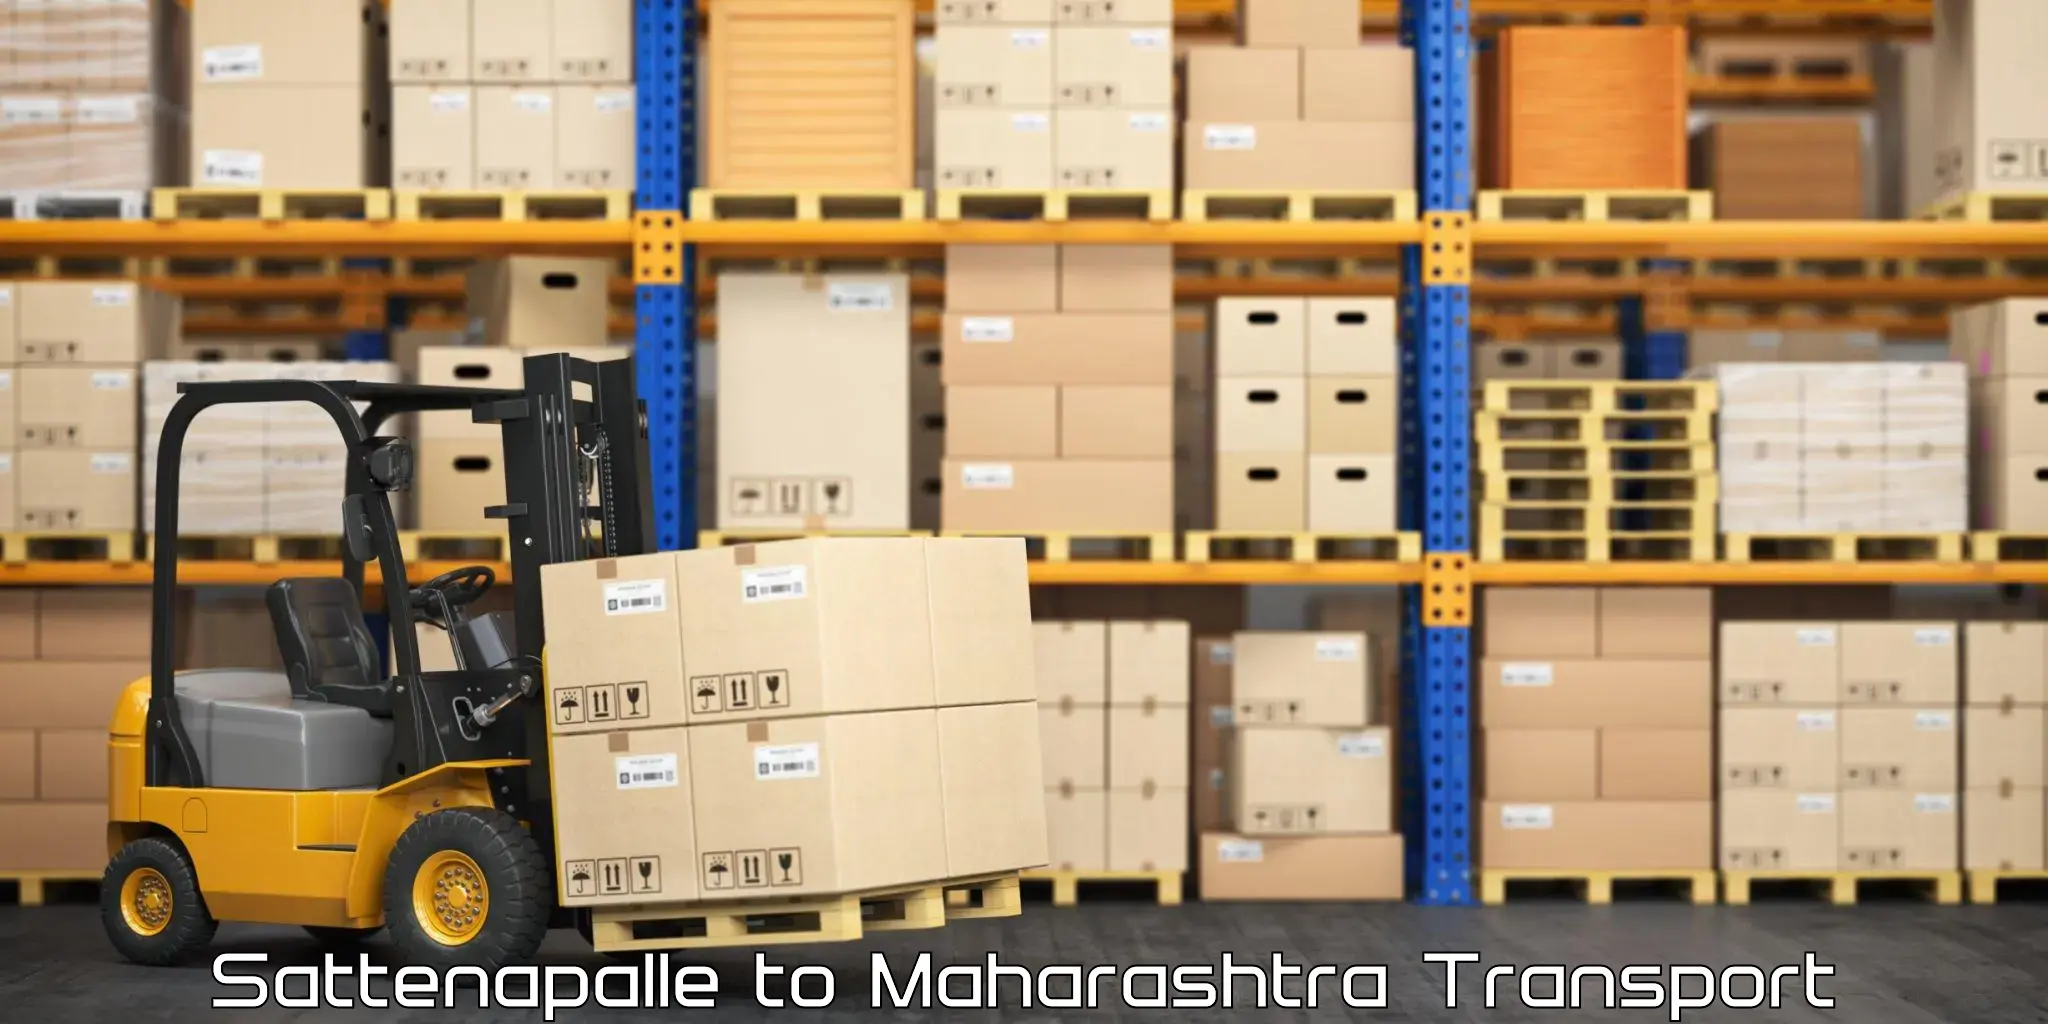 Truck transport companies in India Sattenapalle to Khamgaon